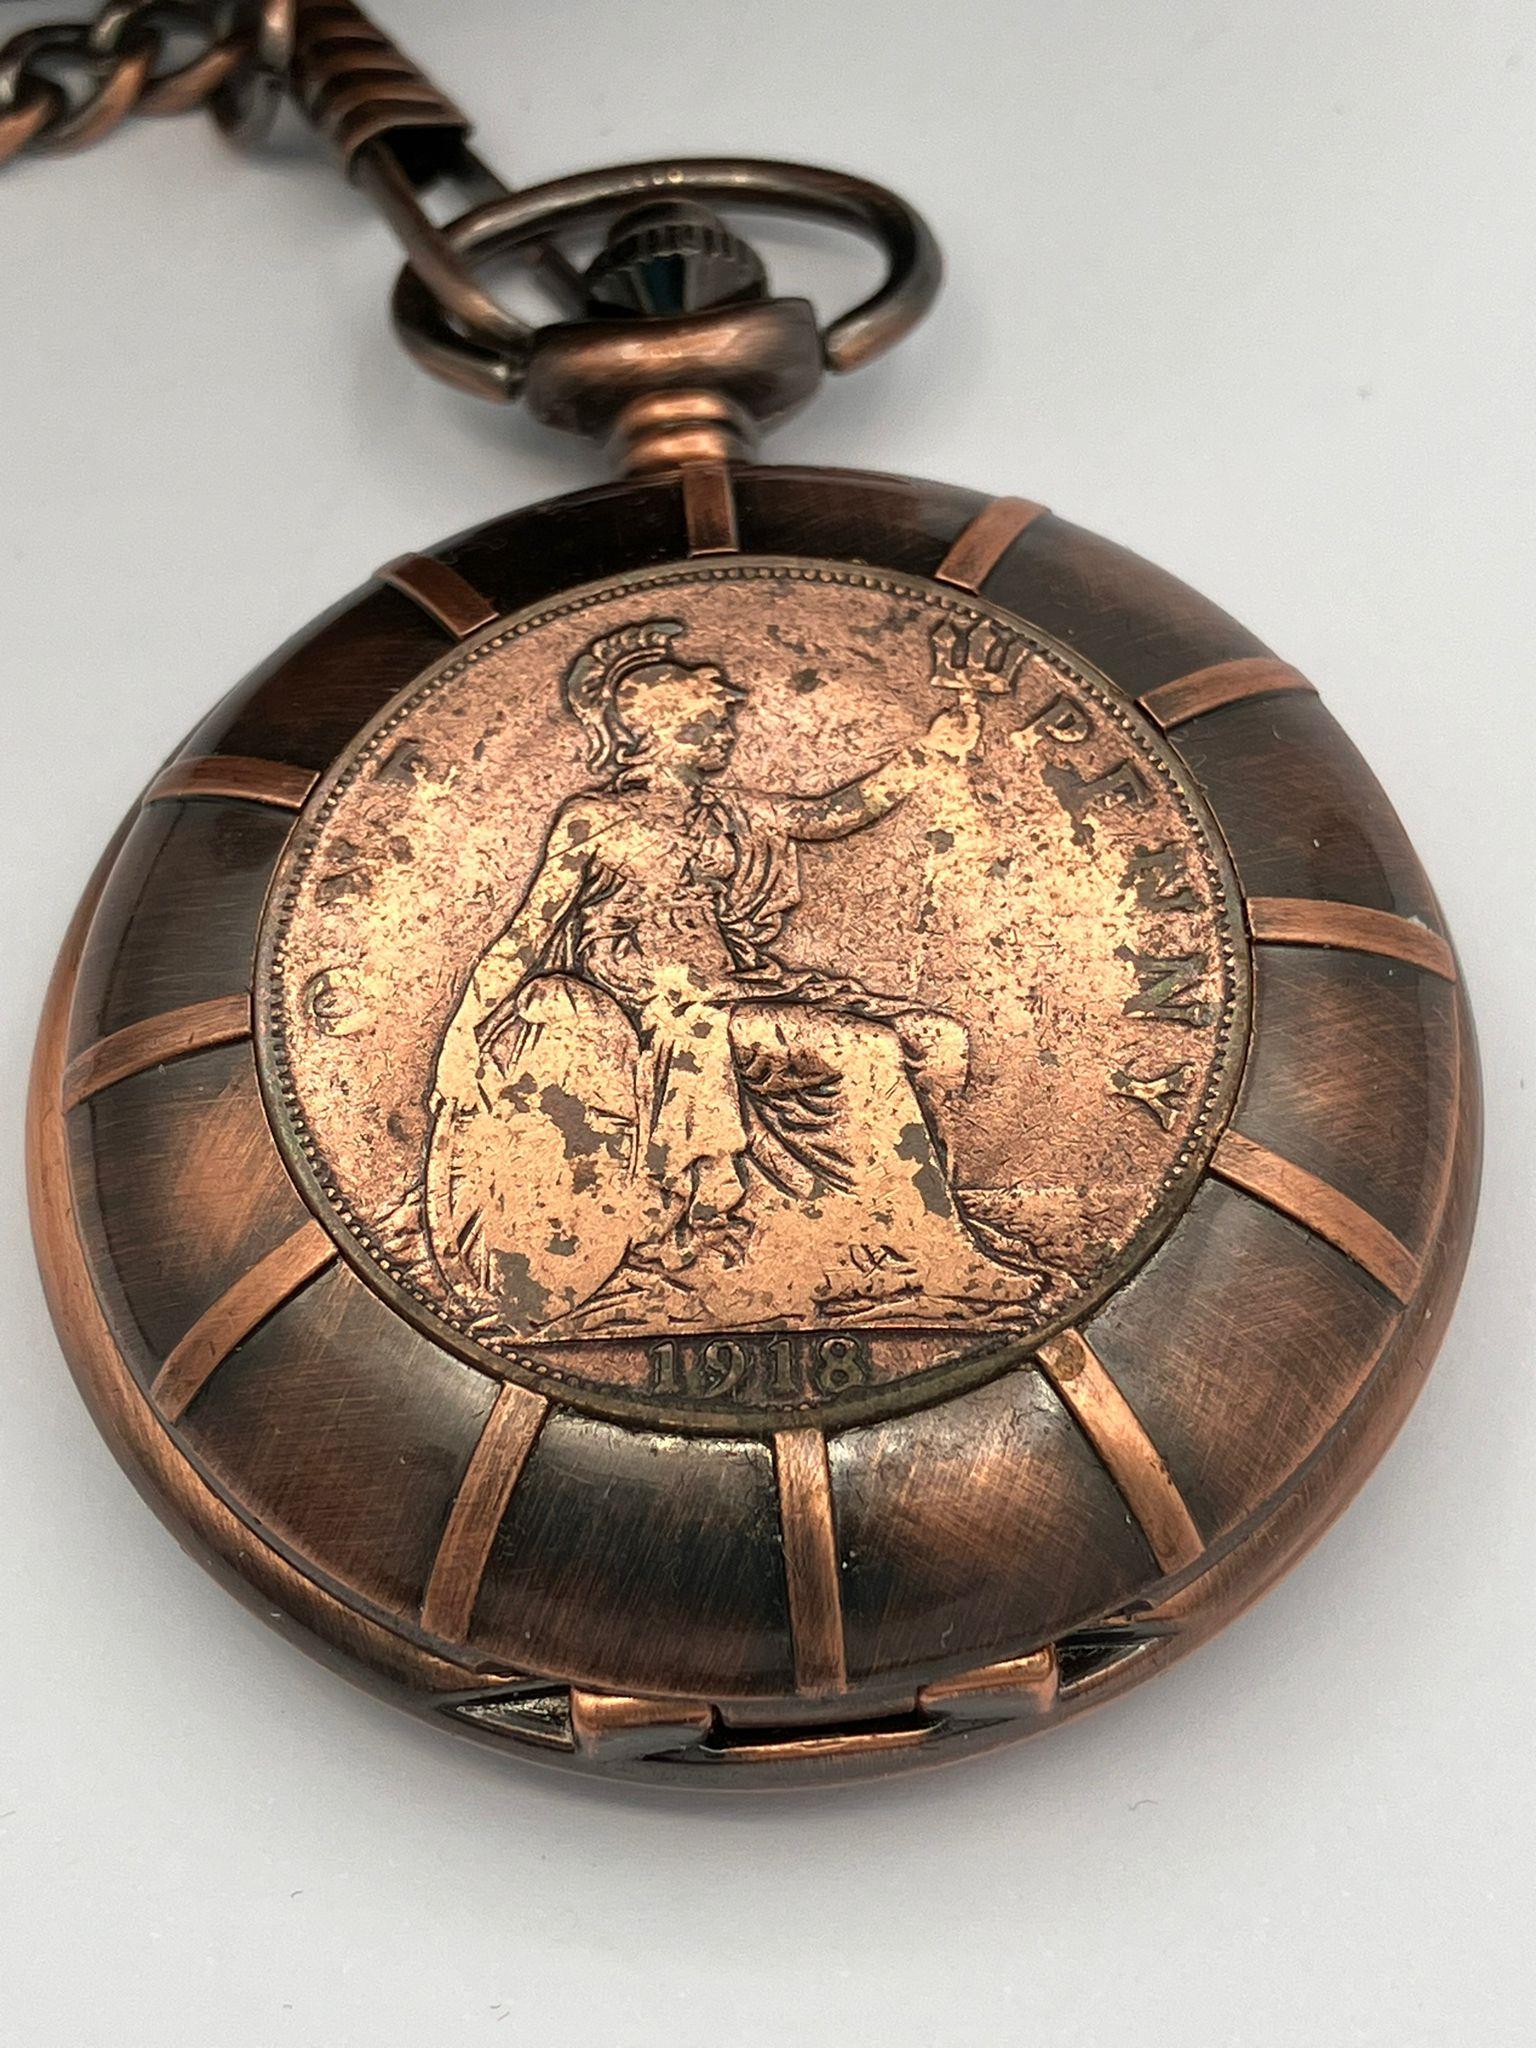 Collectors Penny Pocket Watch, having genuine 1918 PENNY COIN mounted to front of Watch Case. Dark